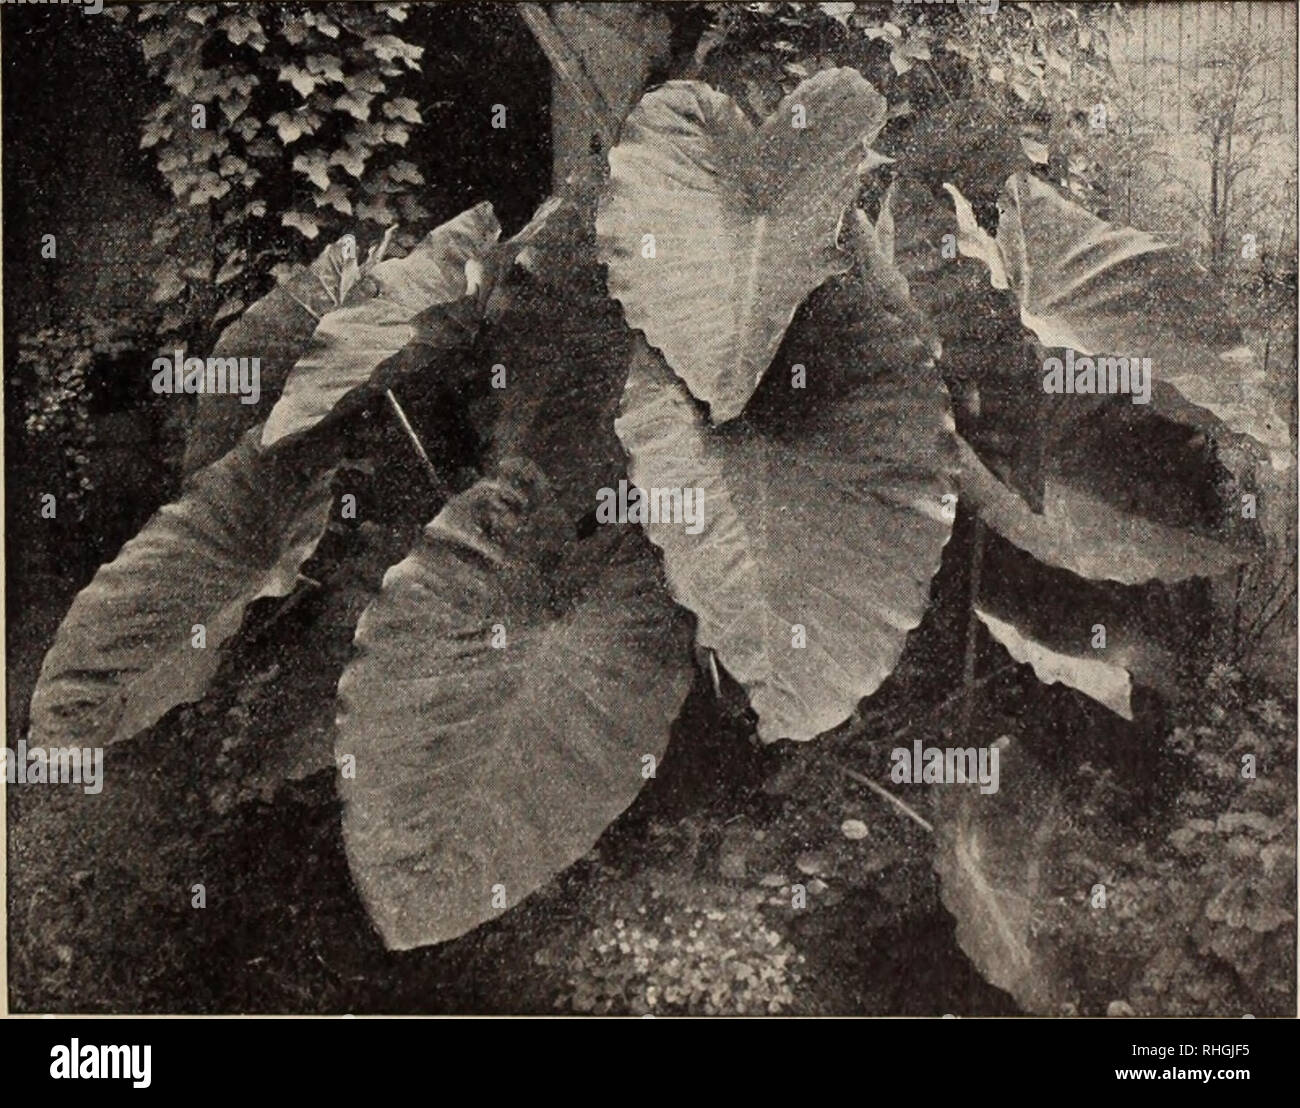 . Boddington's quality bulbs, seeds and plants / Arthur T. Boddington.. Nursery Catalogue. Oaladium escuientum, or Elephant's Ear Specimen Fancy-leaved Caladium Raoul Pugno. Very transparent, pale flesh color, mar- gin dark green, rosy center. Raymond Lemoinier. Creamy white zone on carmine- red leaf; very rich appearance. Reine de Denmark. Pale rose, with crimson-carmine veins. Silver Cloud. Grand color silvery white, relieved by short carmine veins and small green spots. Price of any of the above-named varie- ties, 76 cts. each, S7.60 per doz., S50 per lOO ; the collection as above for SIO.  Stock Photo